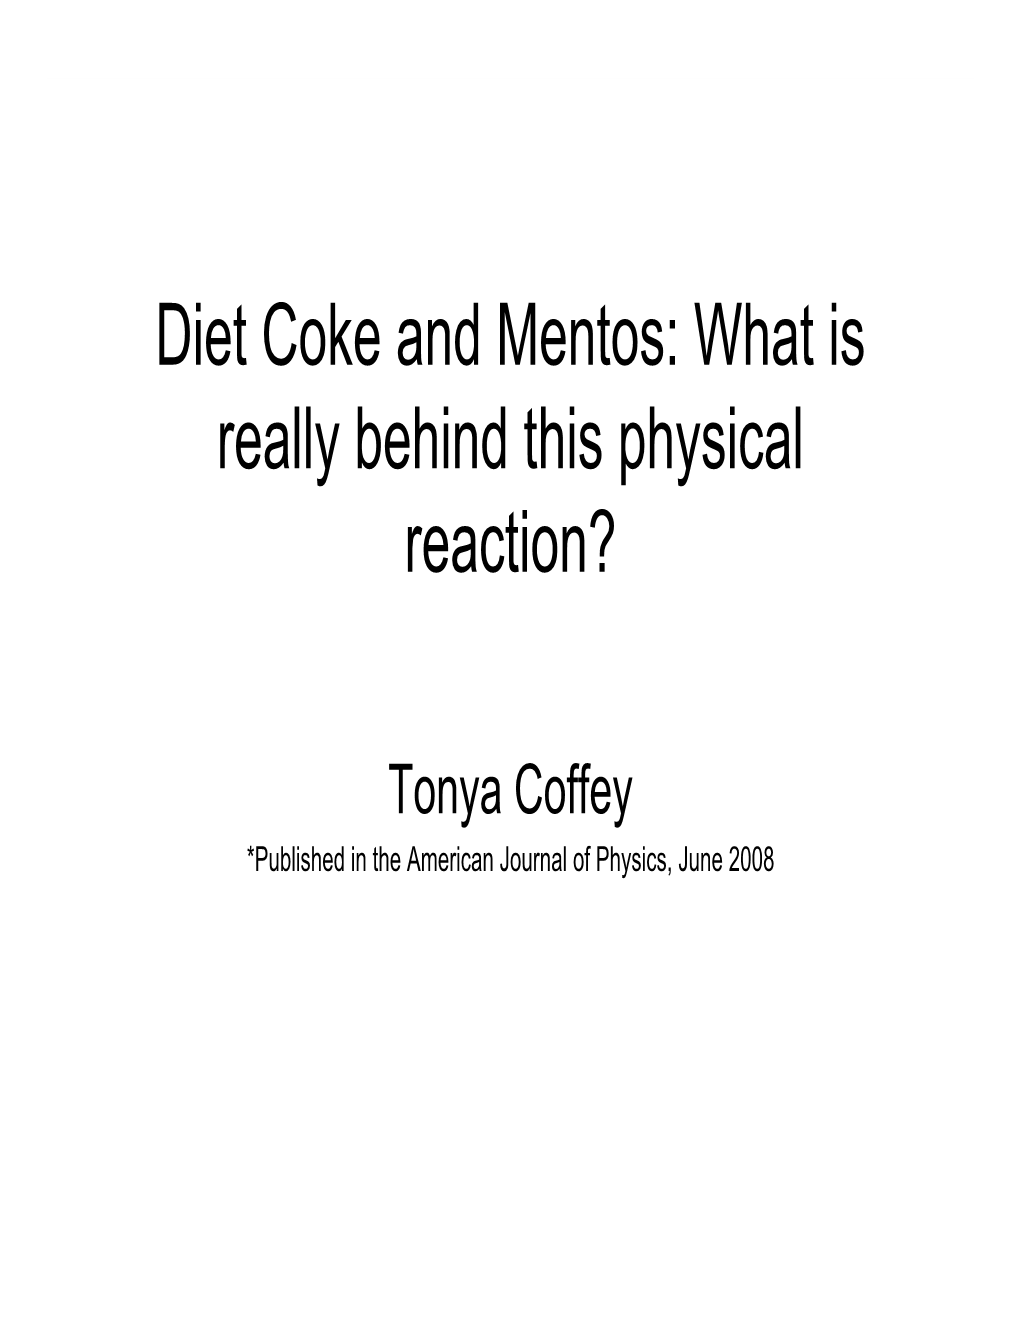 Diet Coke and Mentos: What Is Really Behind This Physical Reaction?